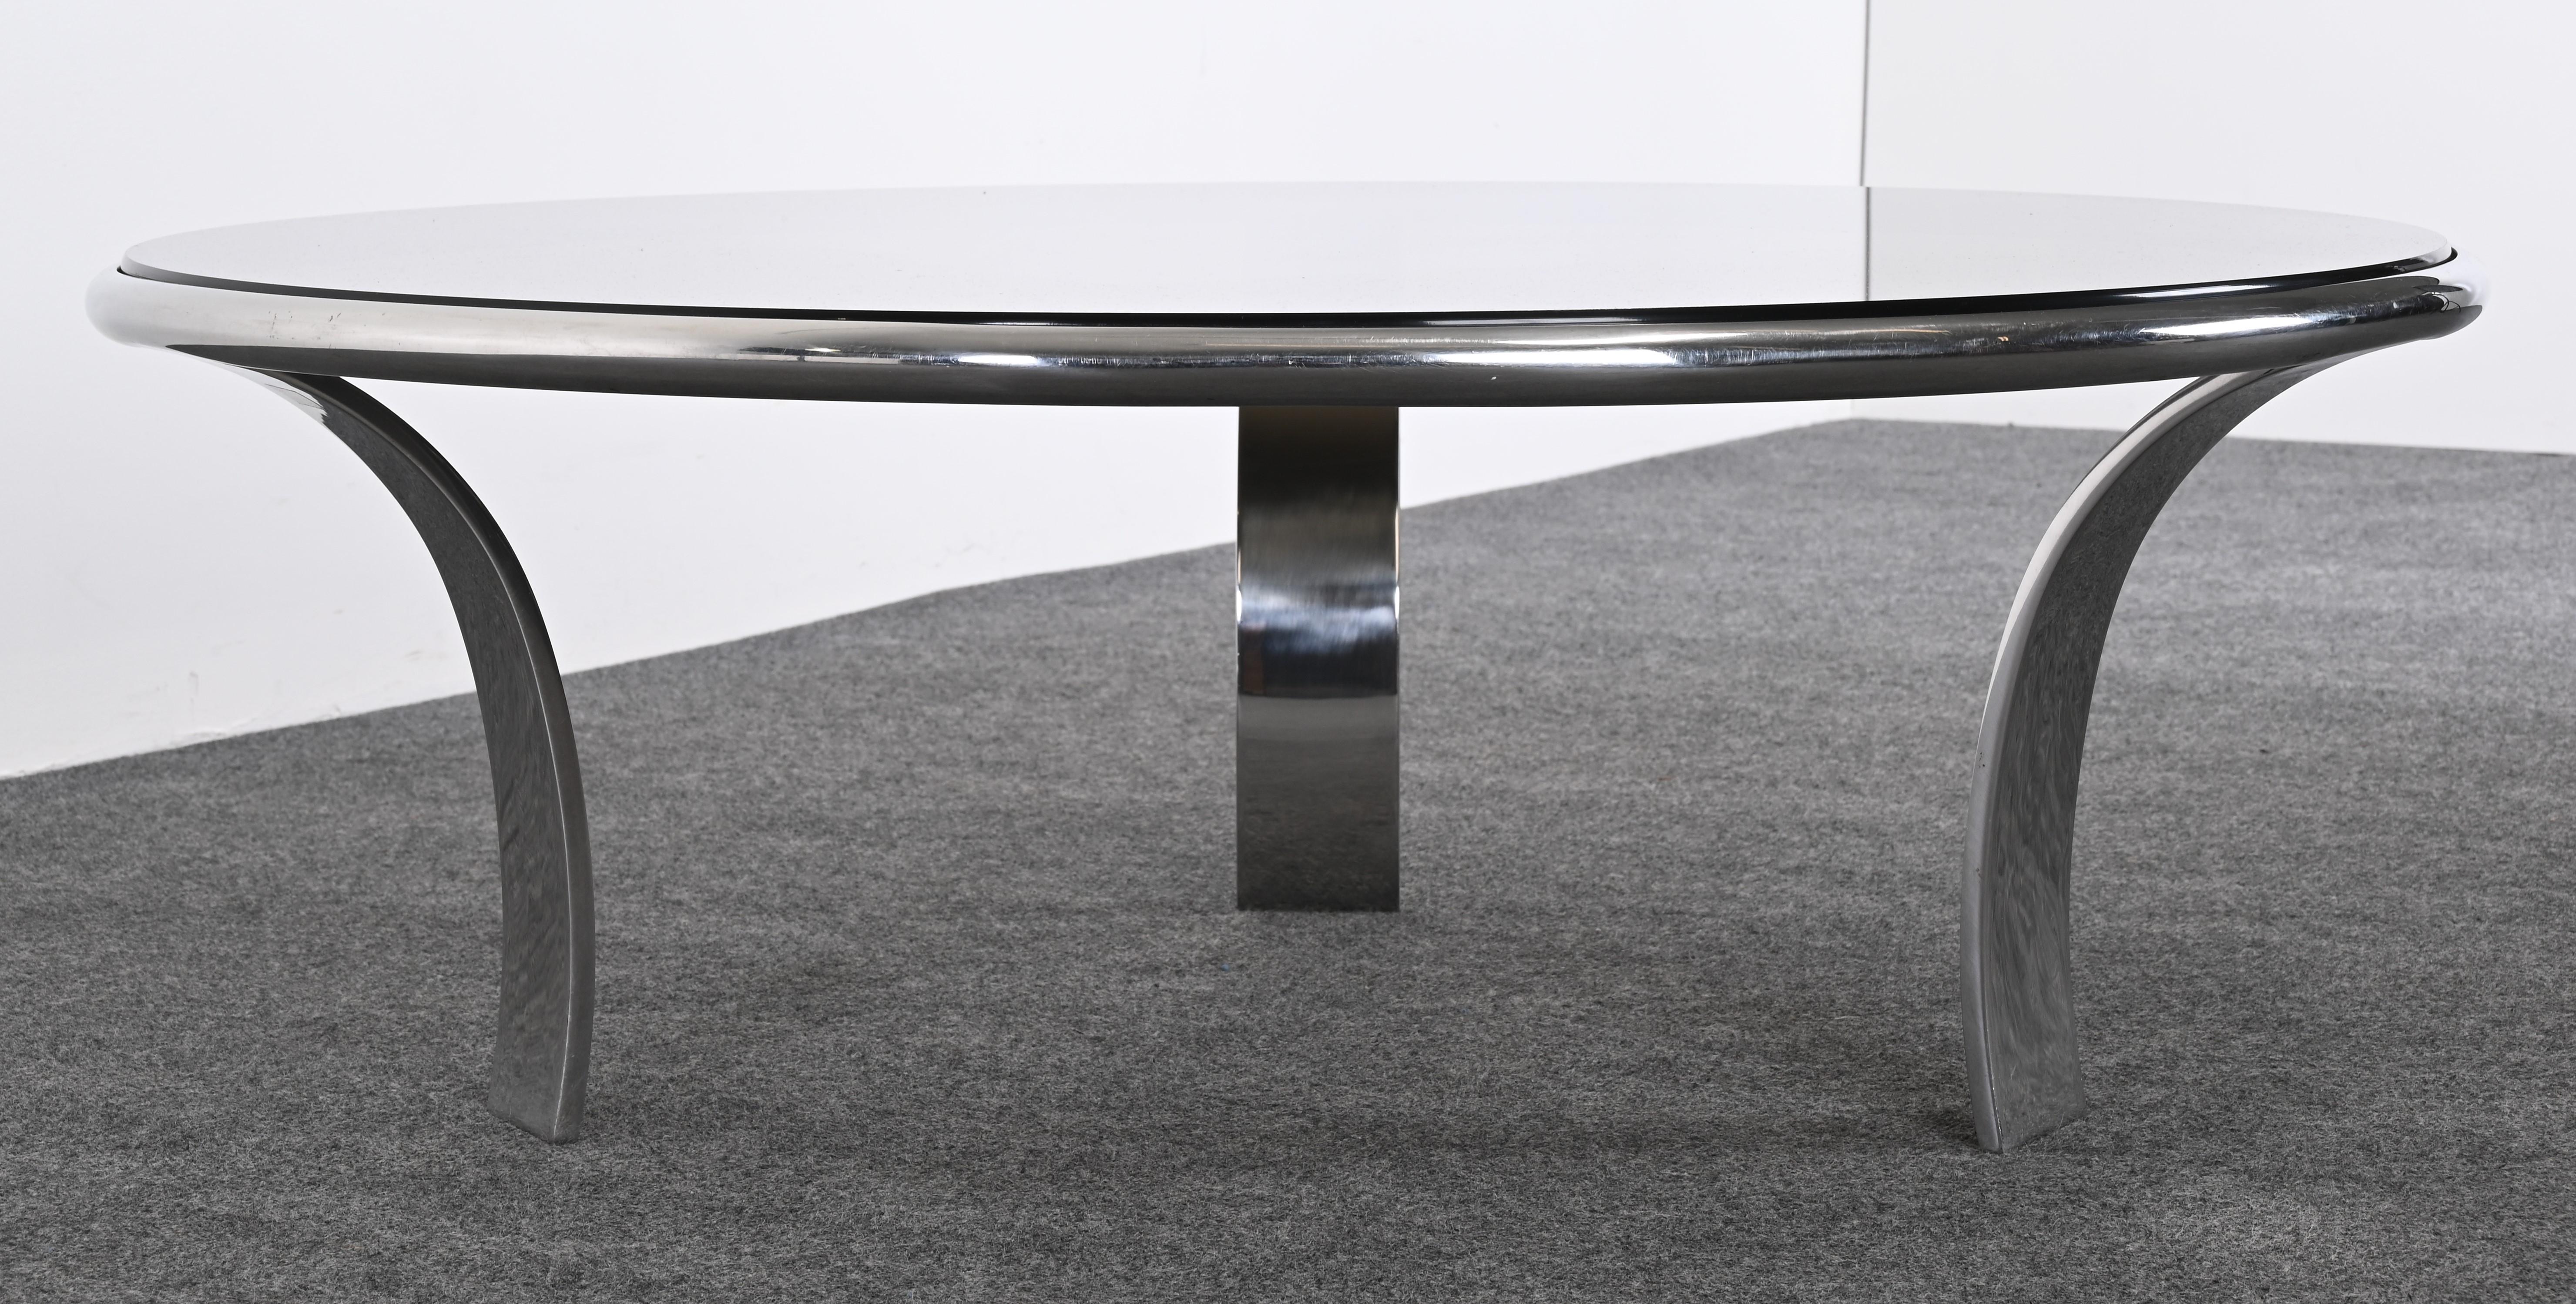 Late 20th Century Stainless Steel Coffee Table by Steelcase Designed by Gardner Leaver, 1970s For Sale